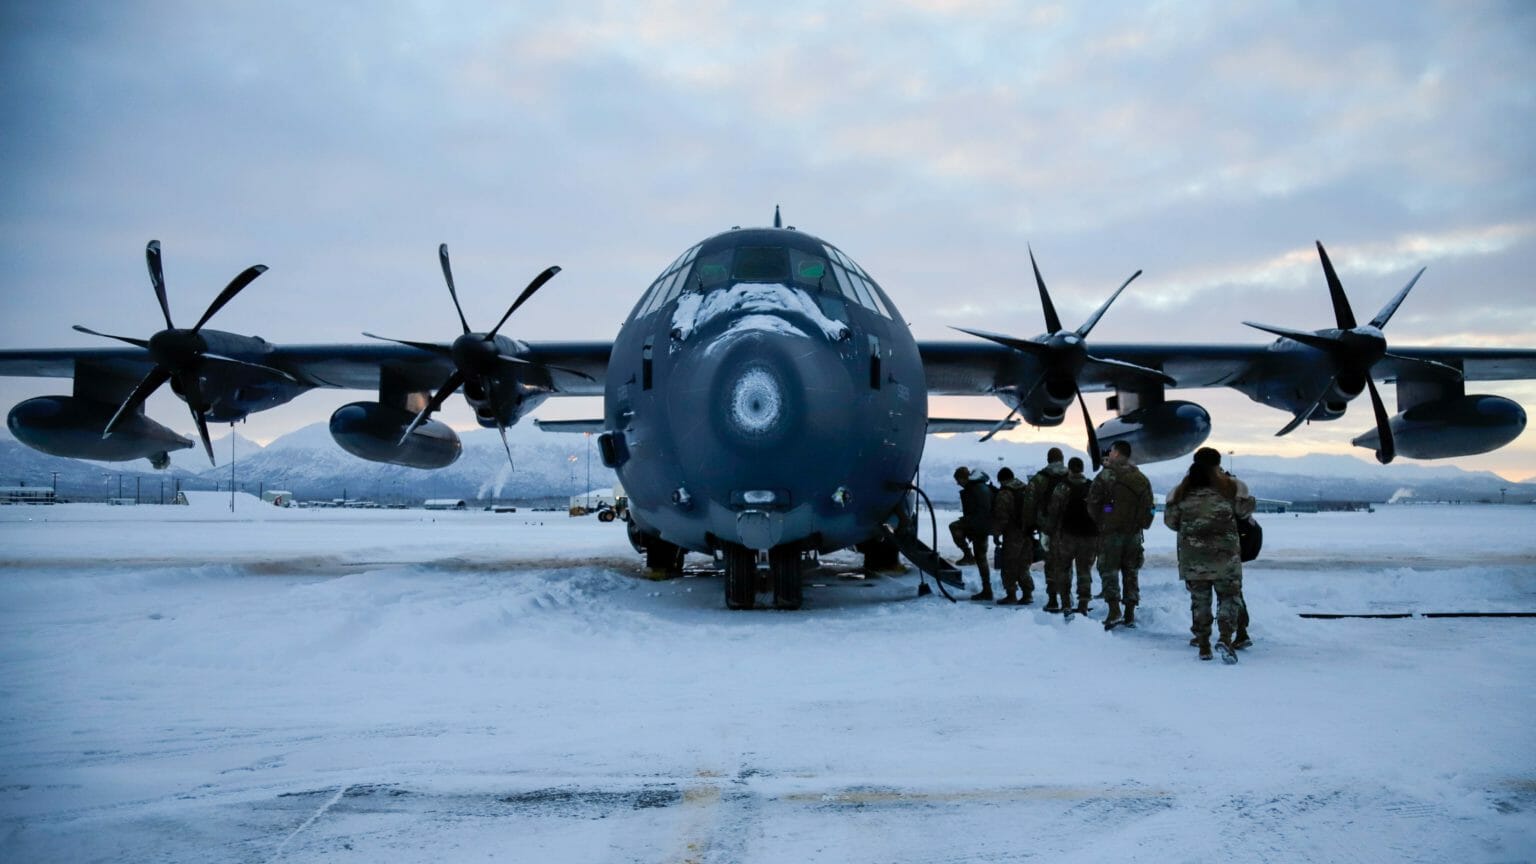 Alaska military bases fall short on climate readiness, federal report says